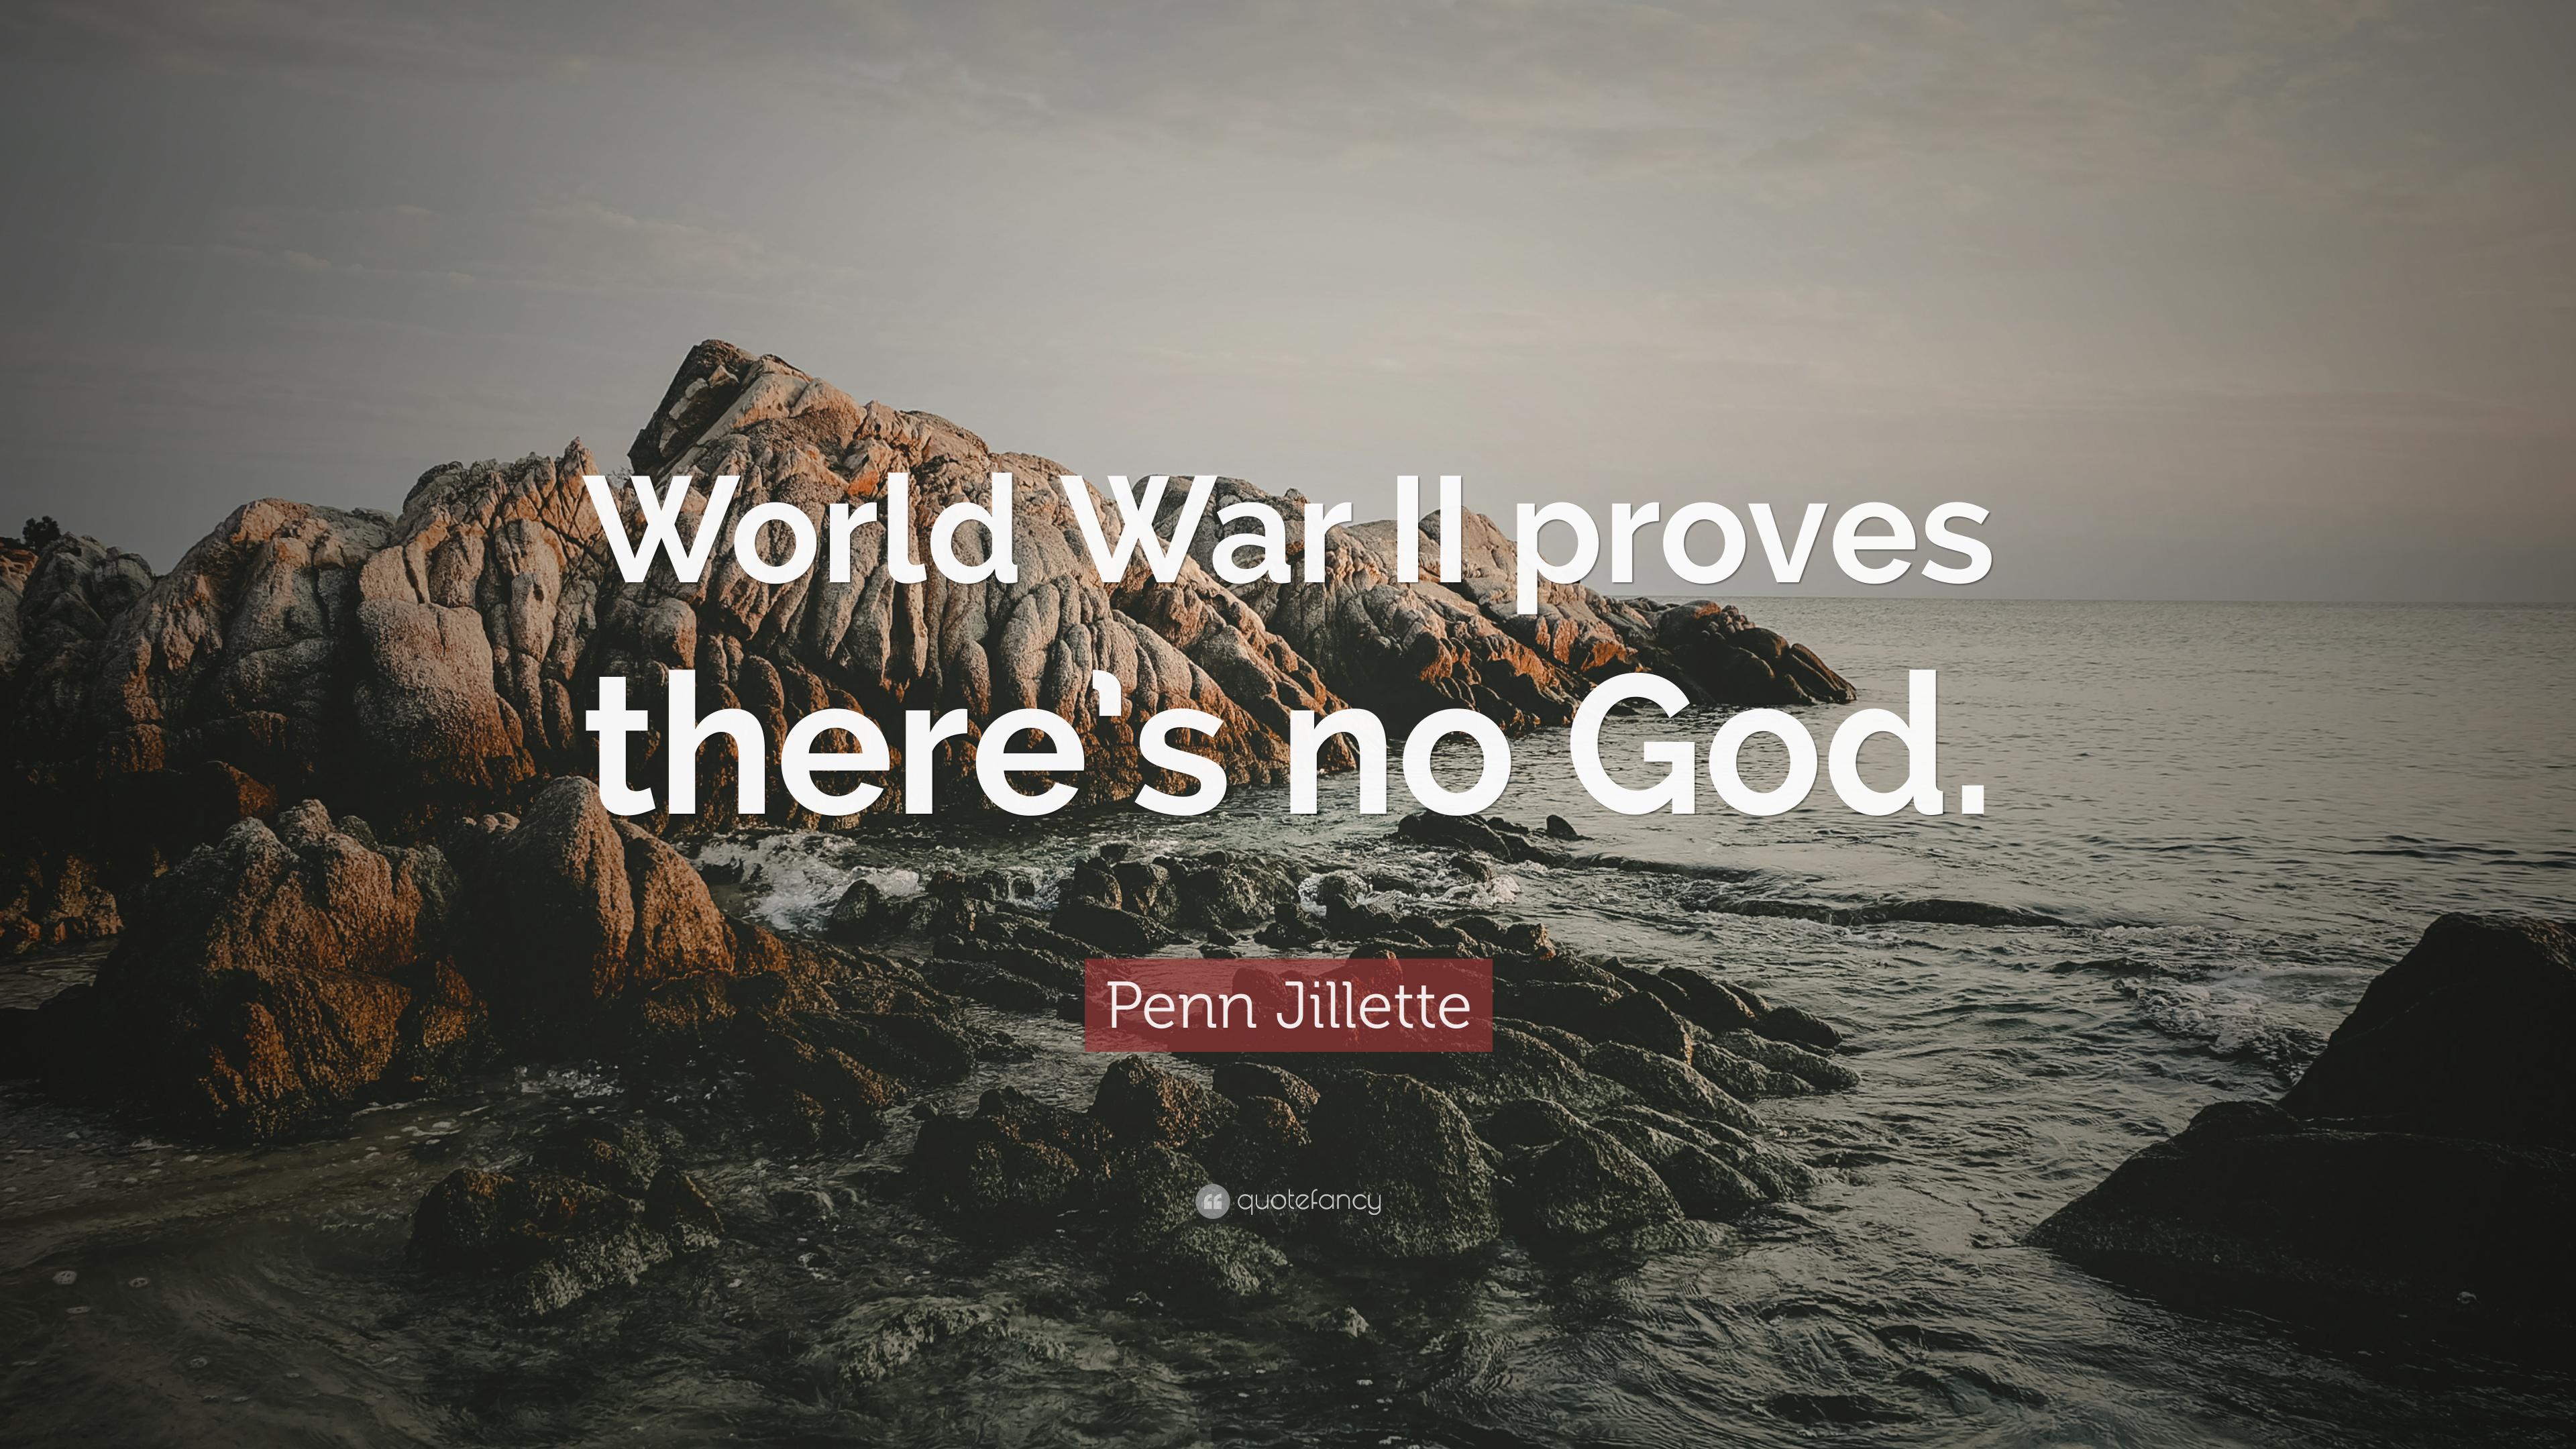 Penn Jillette Quote: “World War II proves there's no God.” 9